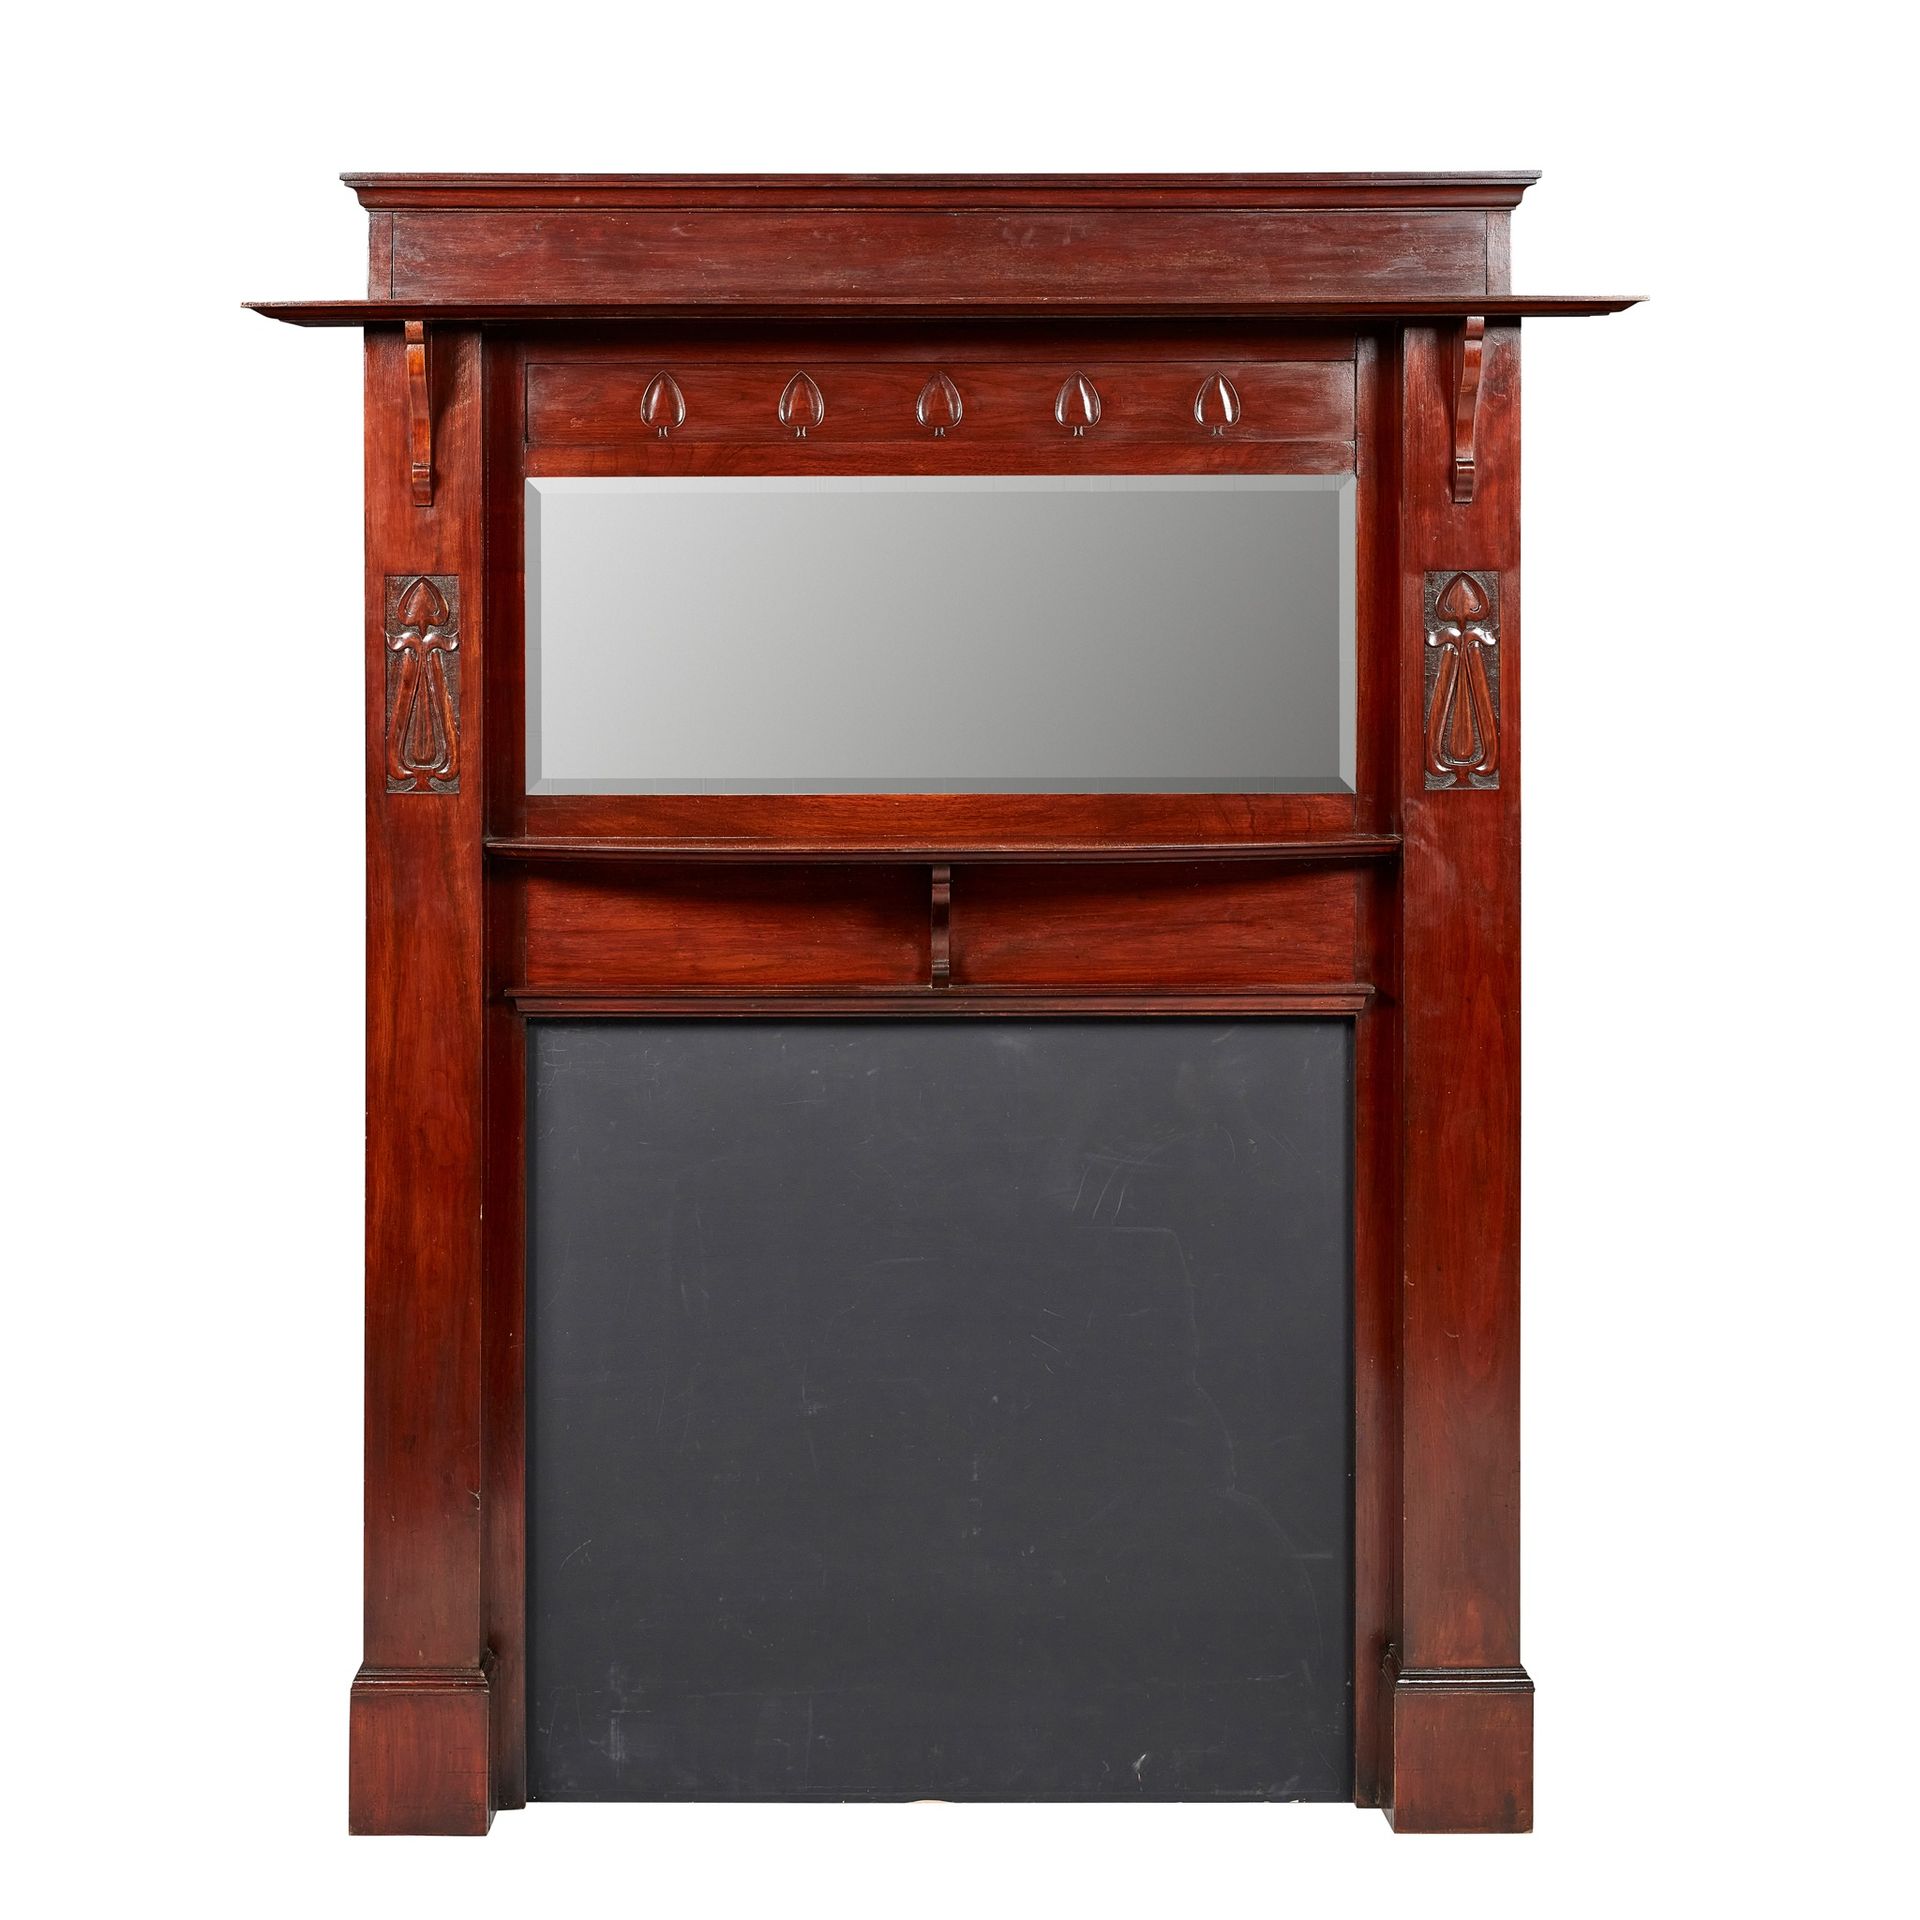 MANNER OF E. A. TAYLOR FOR WYLIE & LOCHHEAD GLASGOW SCHOOL FIRE SURROUND AND OVE&hellip;